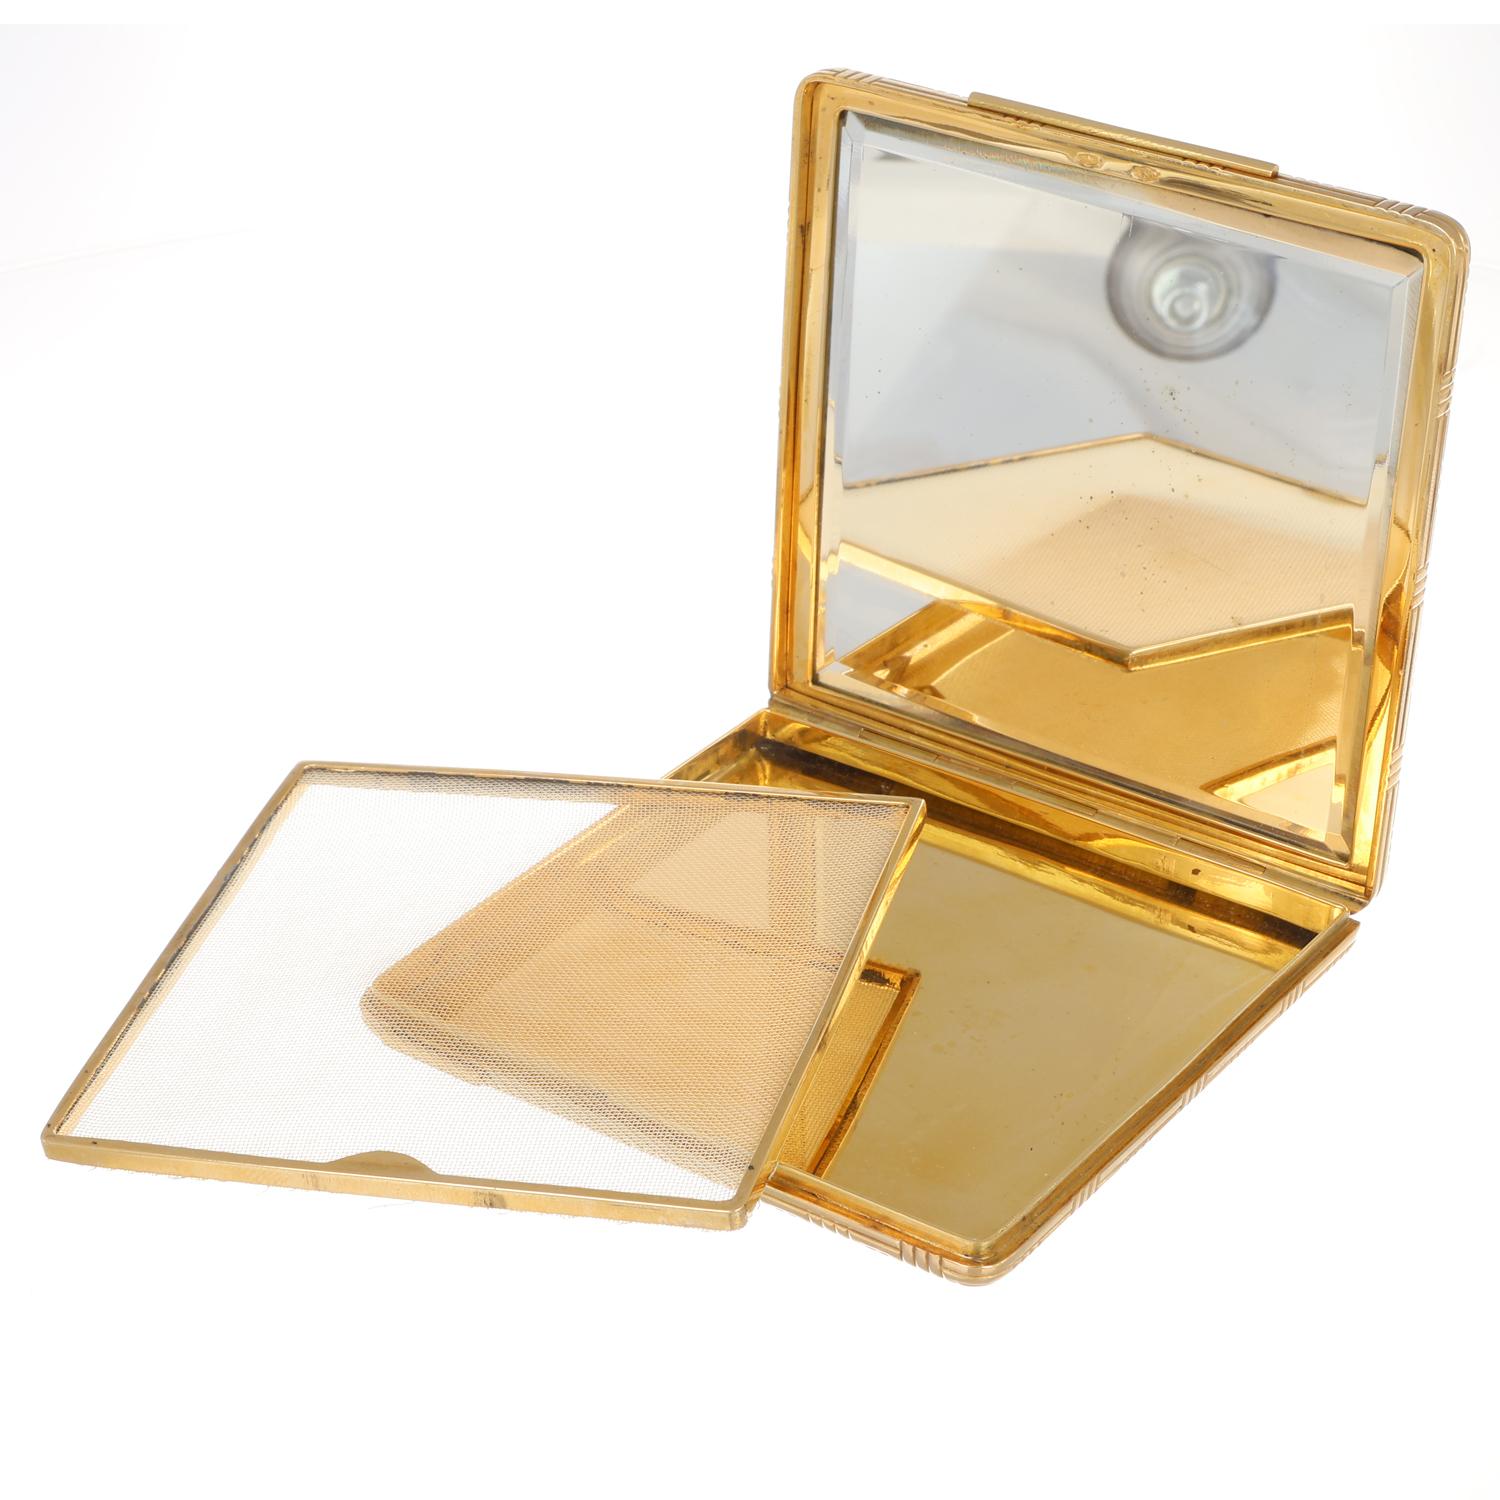 To make this collector's item now, with top-notch Italian craftsmanship, would cost about €20,000

This powder box is an embodiment of sheer elegance and sophistication, a vintage treasure capturing the essence of 1970s glamour. It beckons to an era